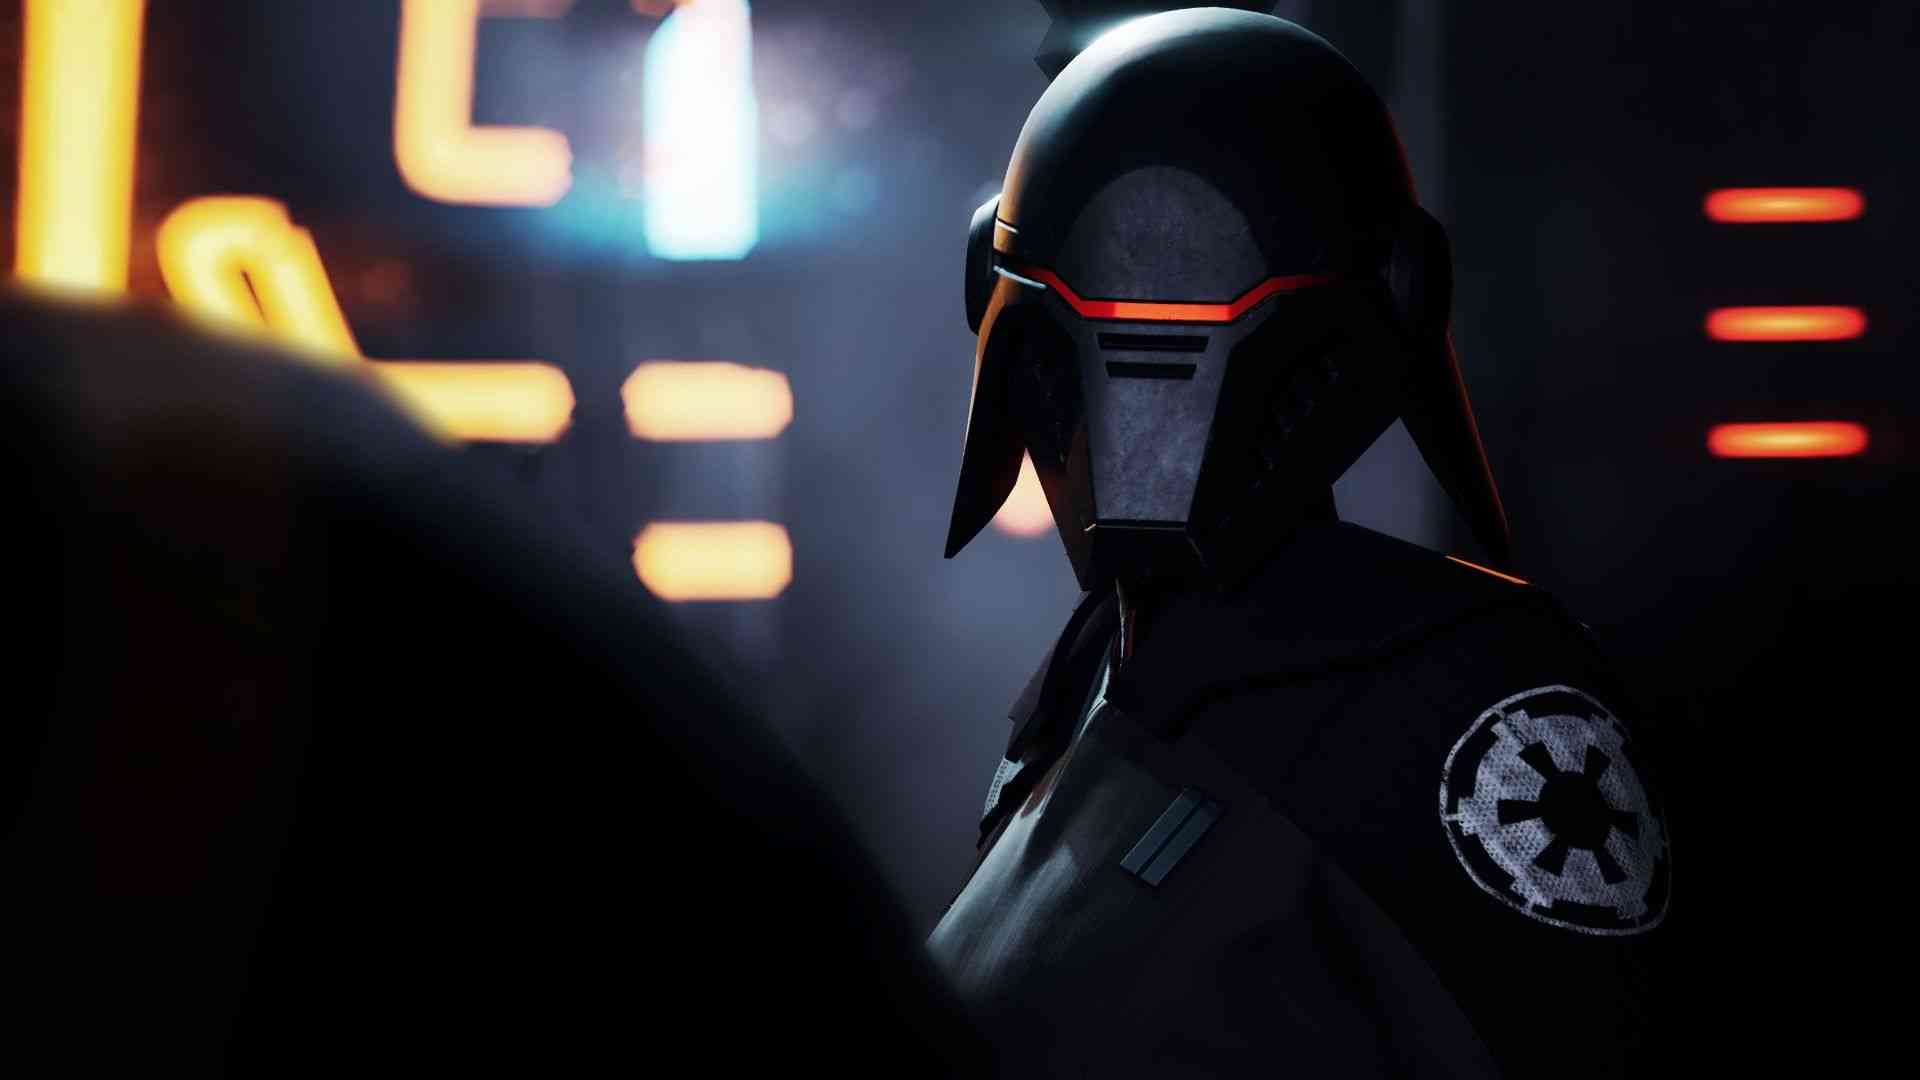 star wars jedi fallen orders system requirements announced 3360 big 1